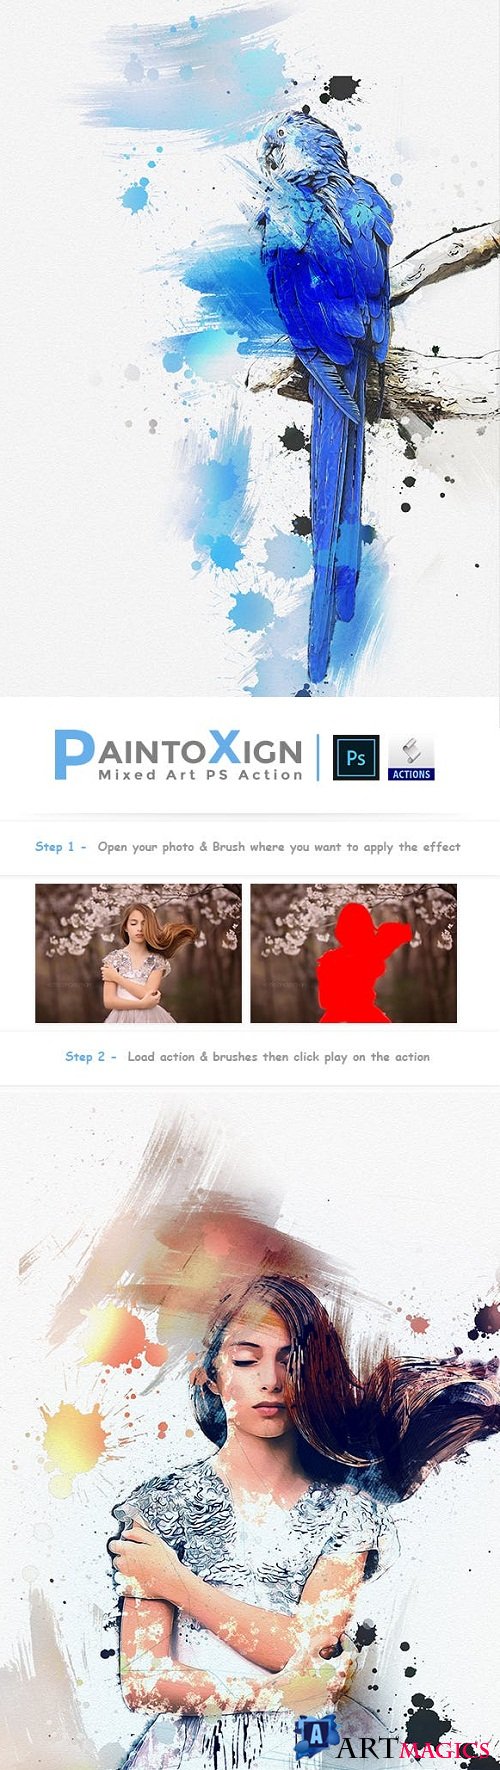 PaintoXign | Mixed Art PS Action 23106638